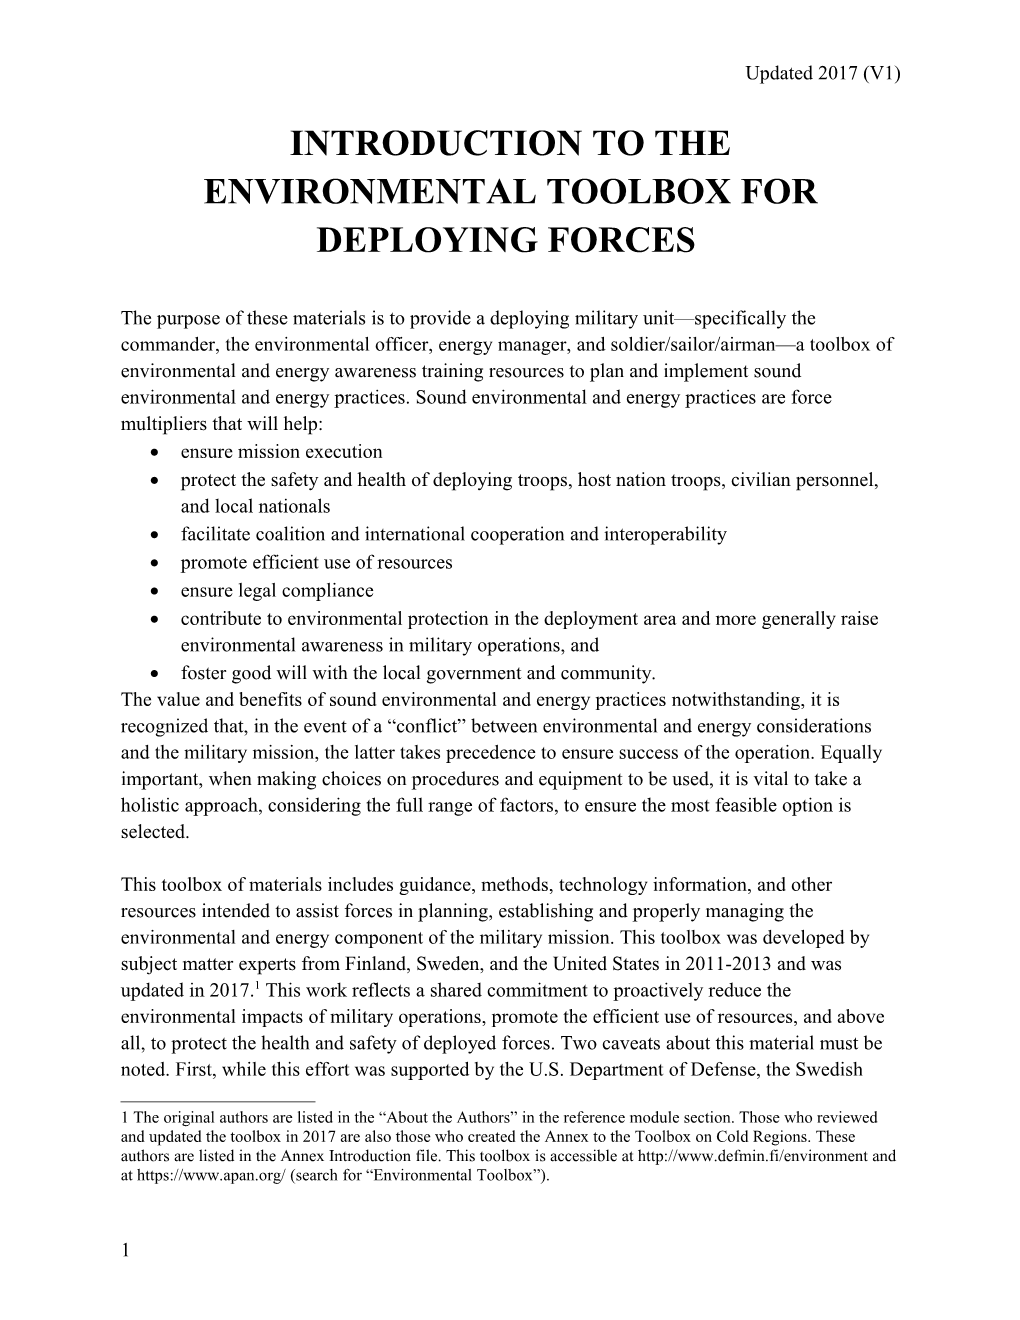 Introduction to the Environmental Toolbox for Deploying Forces